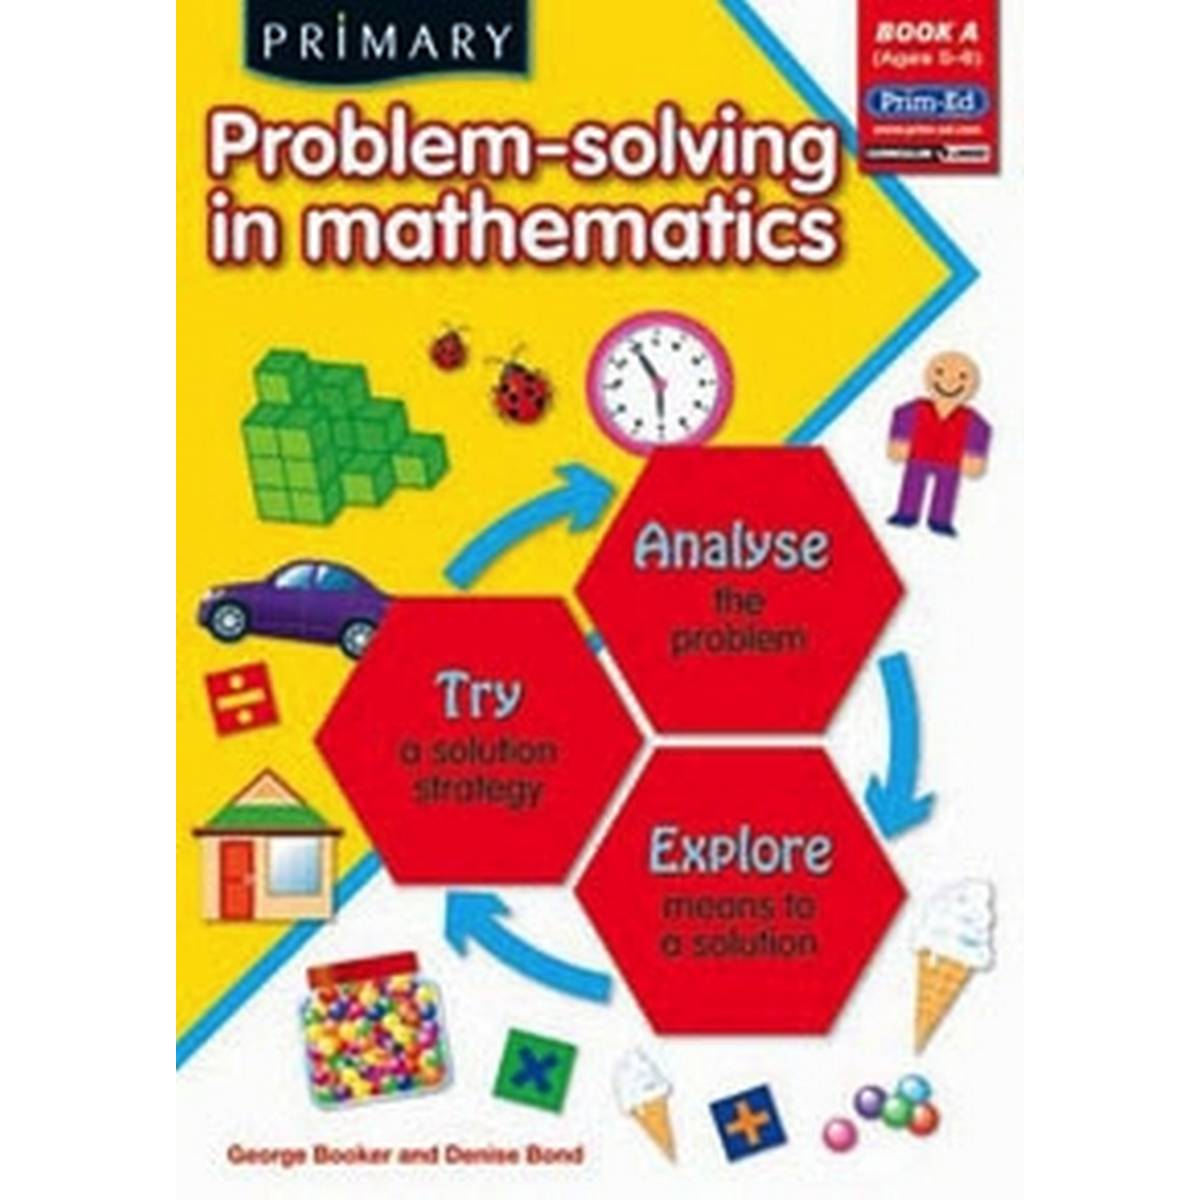 Primary Problem Solving in Maths Book A